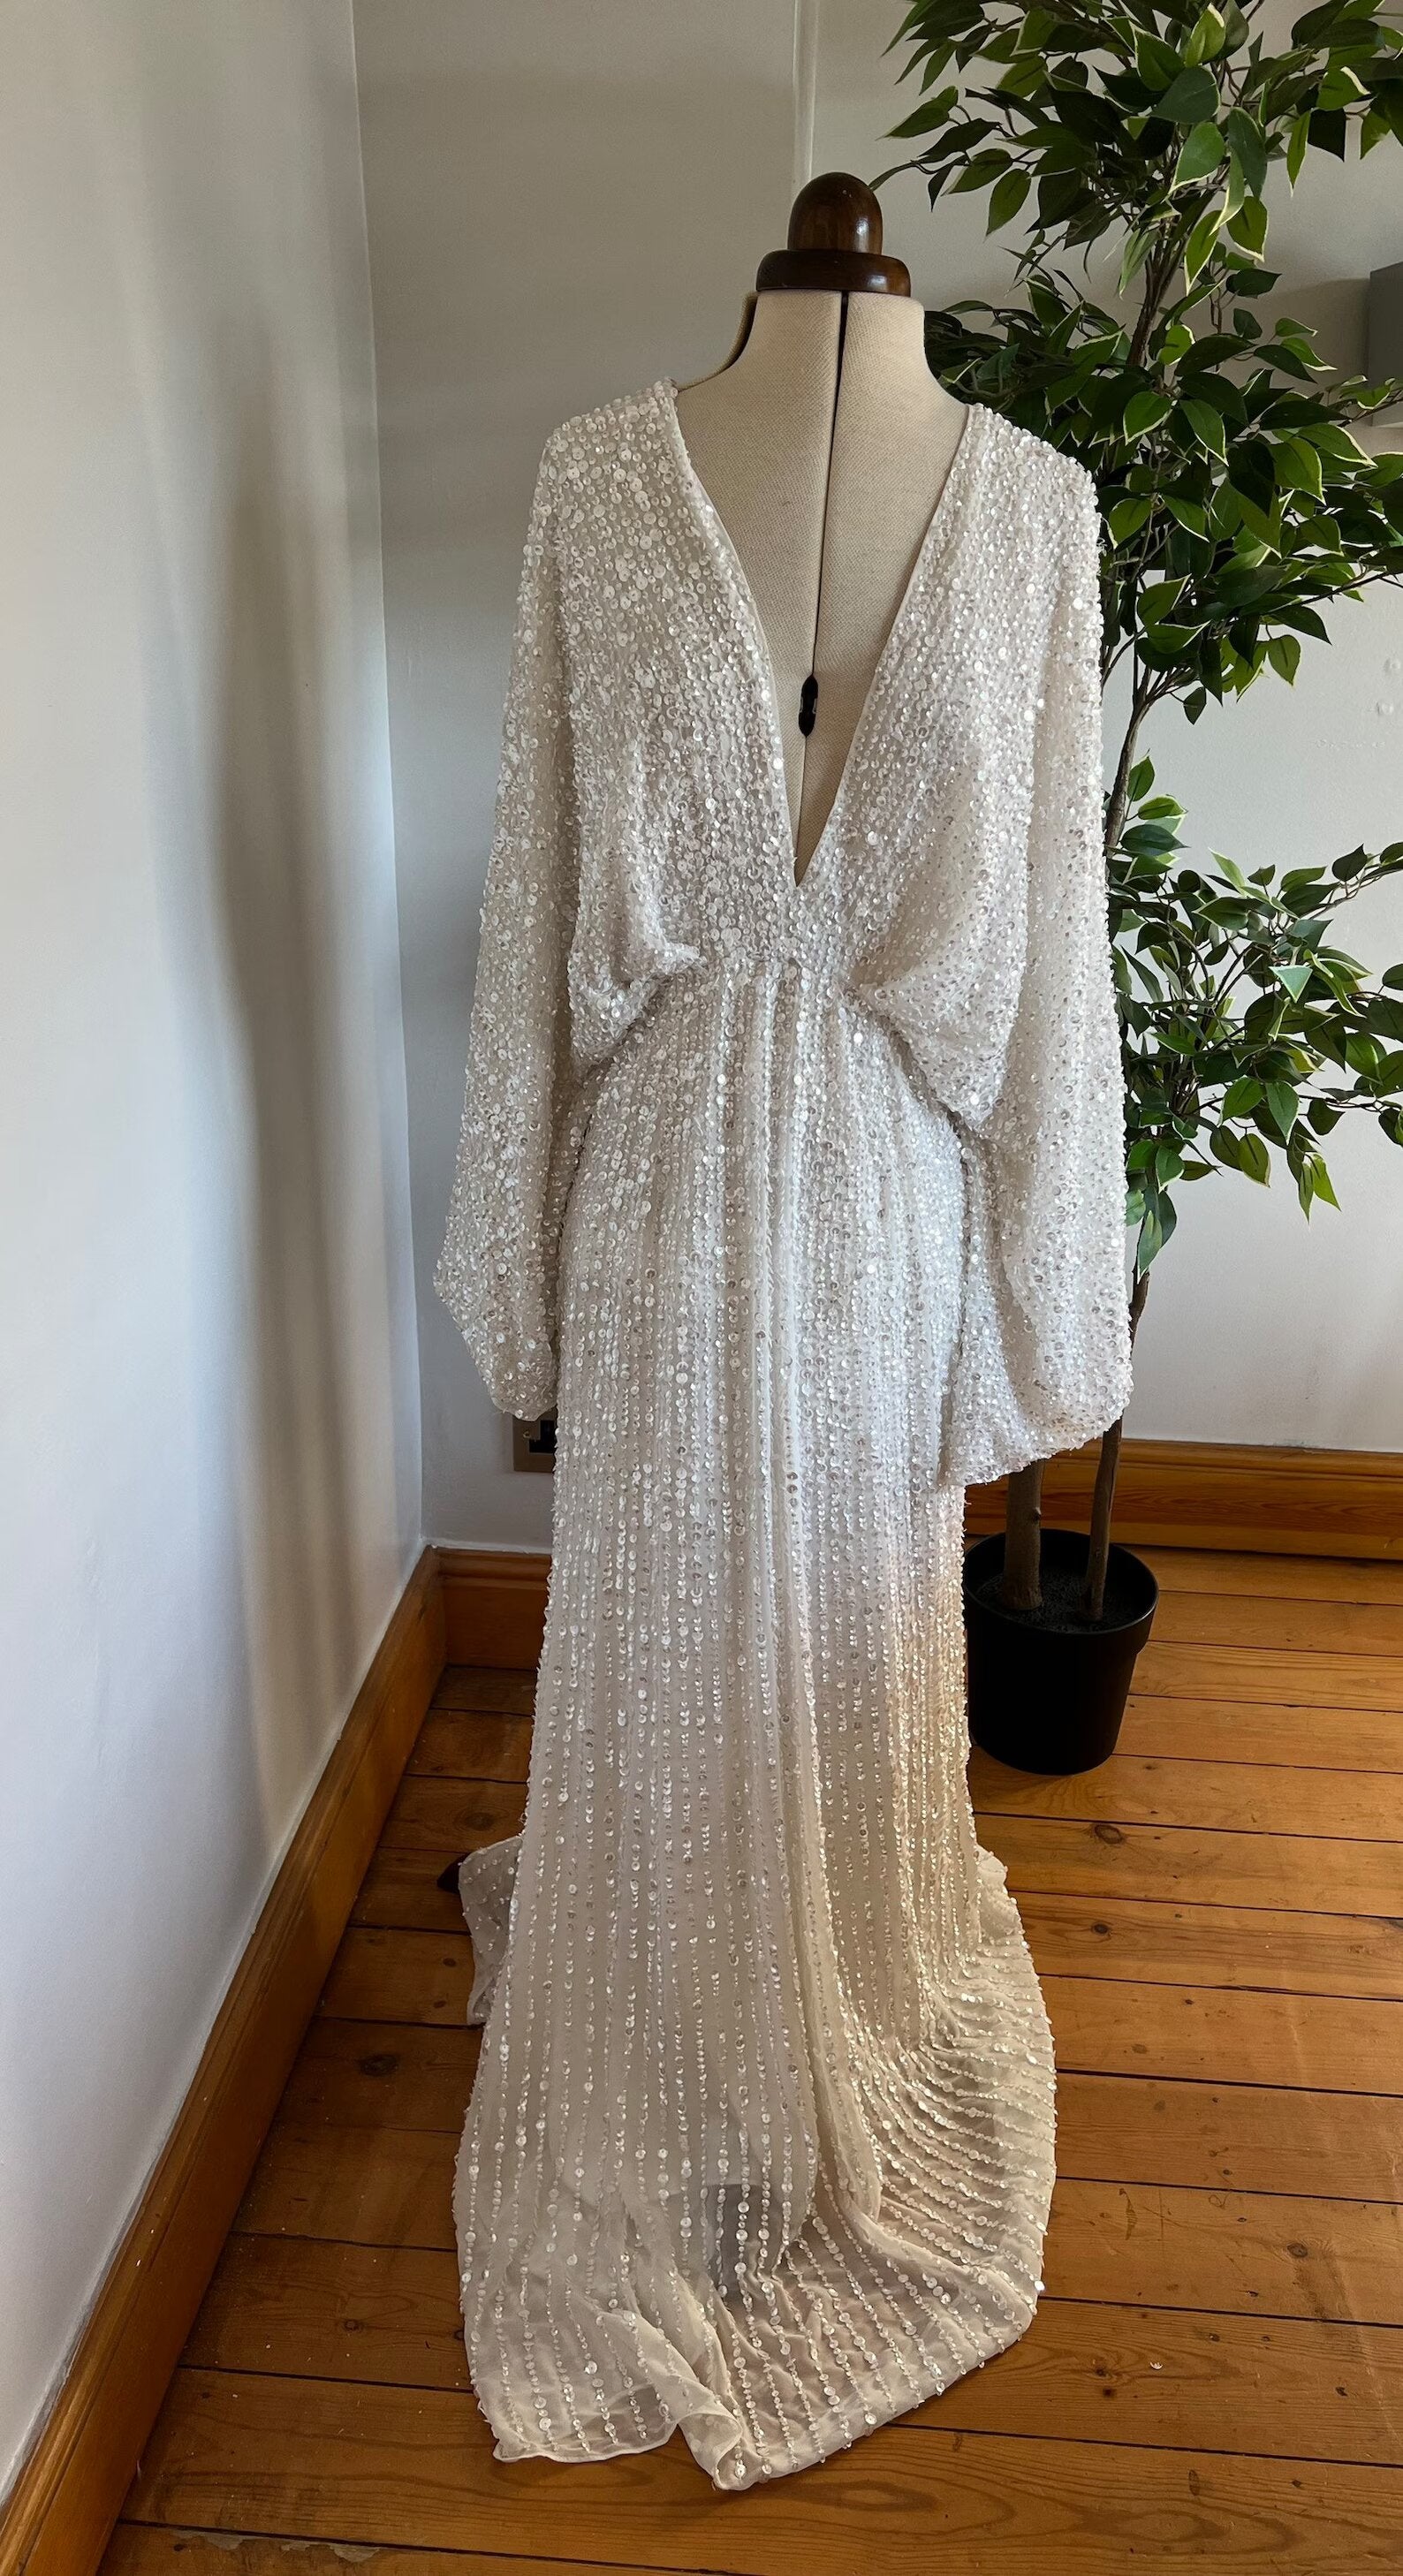 How To Price The Used Wedding Dress for Sale! - Blogs - Borrowing Magnolia